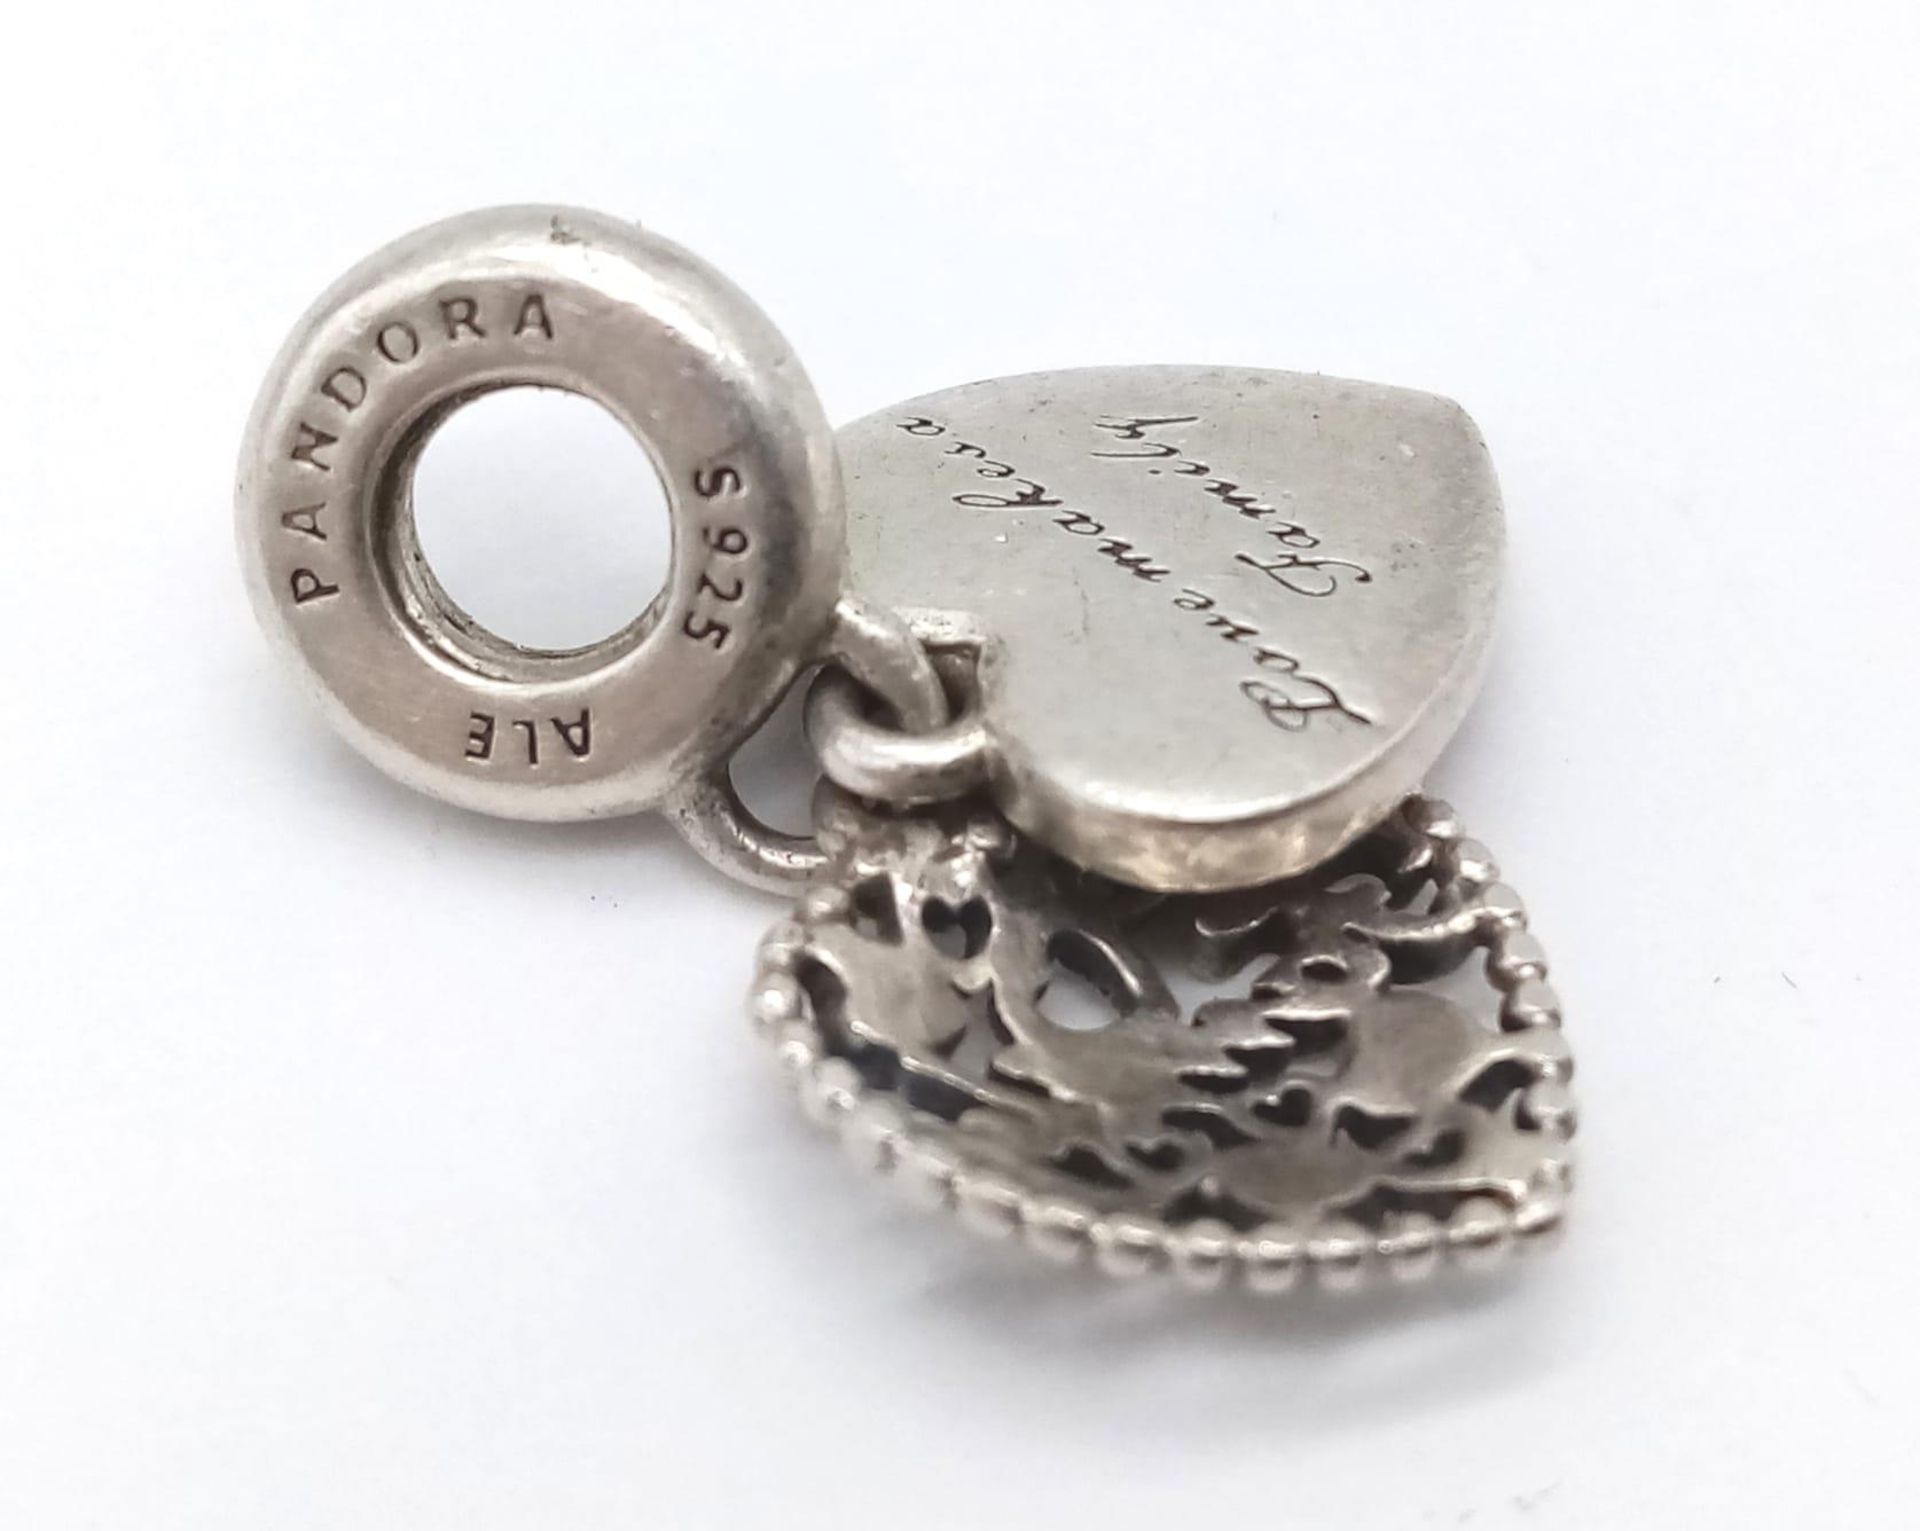 2 x Pandora Sterling Silver Heart Charms - one says 'Family' and the other says 'First My Mother, - Image 7 of 7